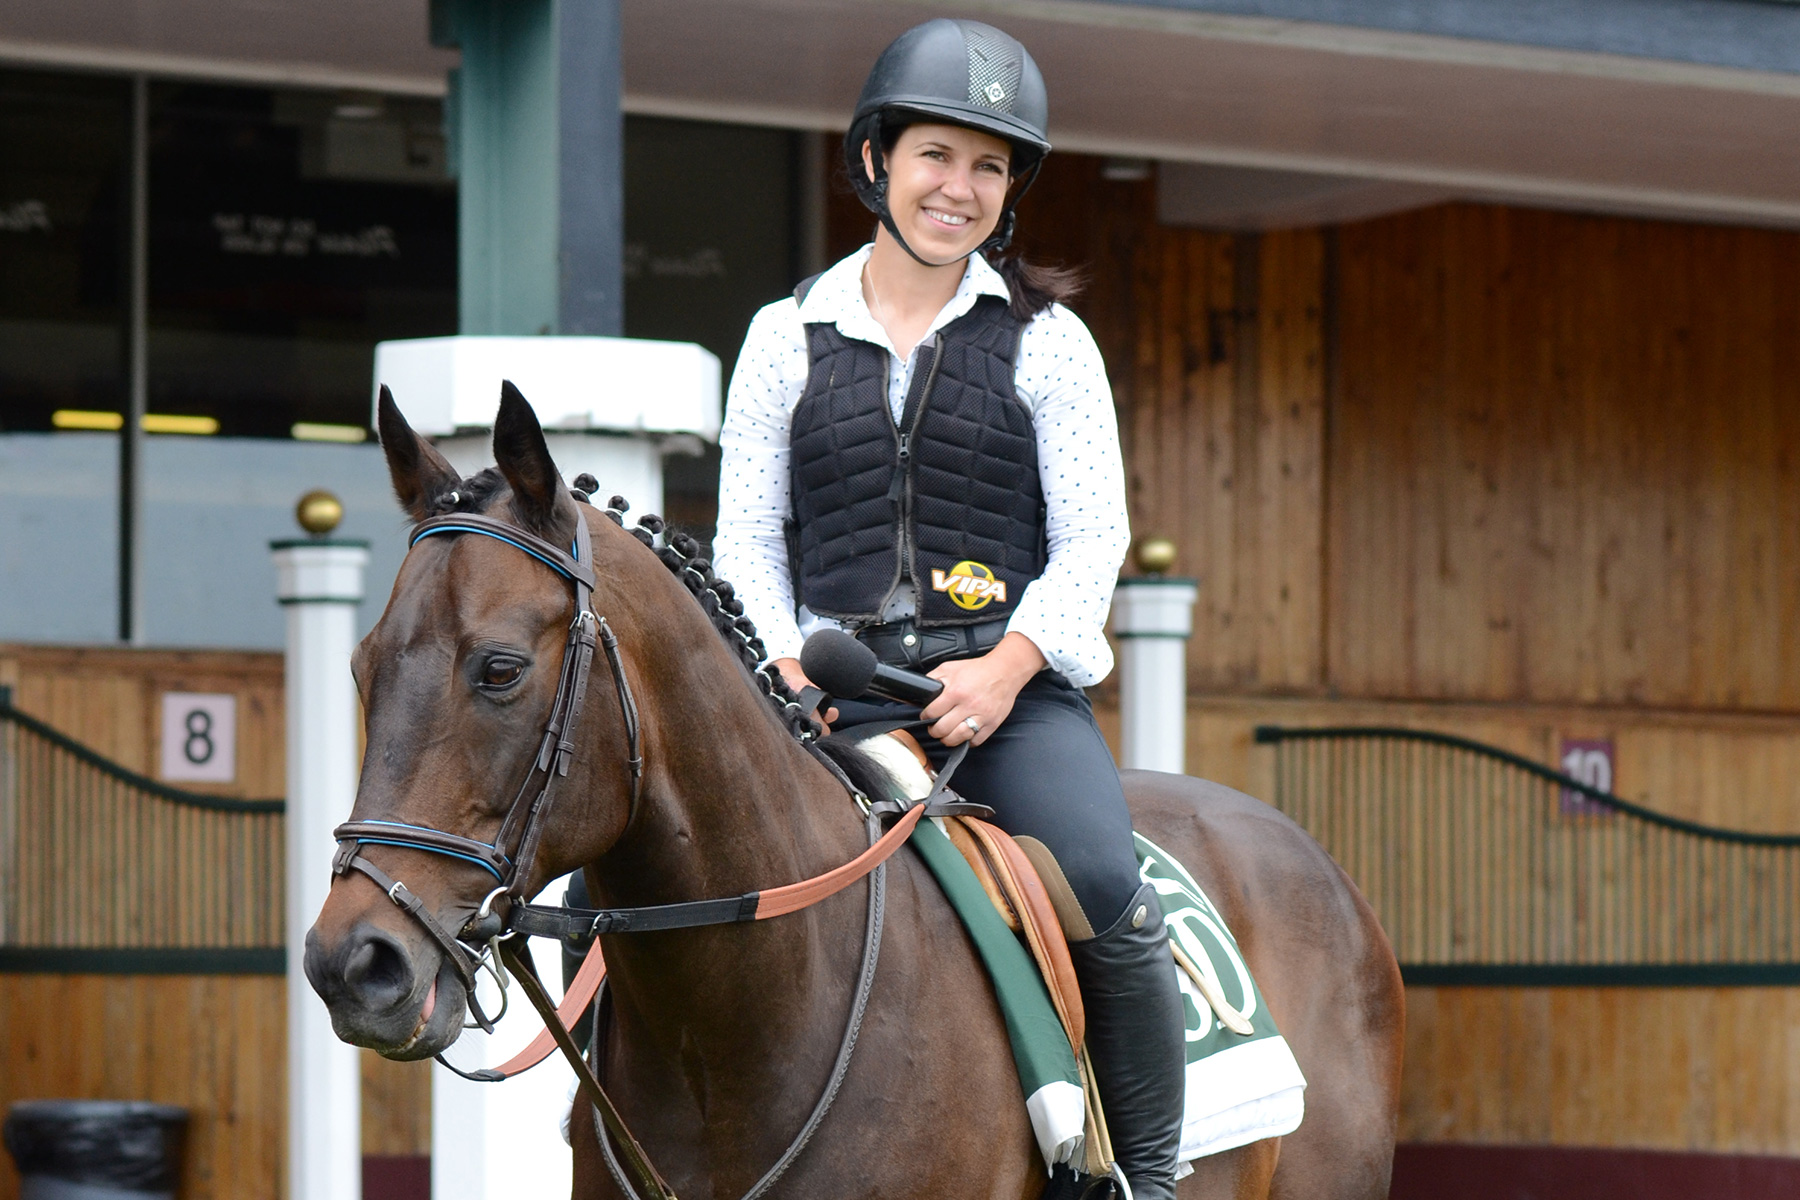 Jessica Paquette delivers her paddock analysis for the first race at Suffolk Downs on June 29, 2019 from atop New England champion Mr. Meso